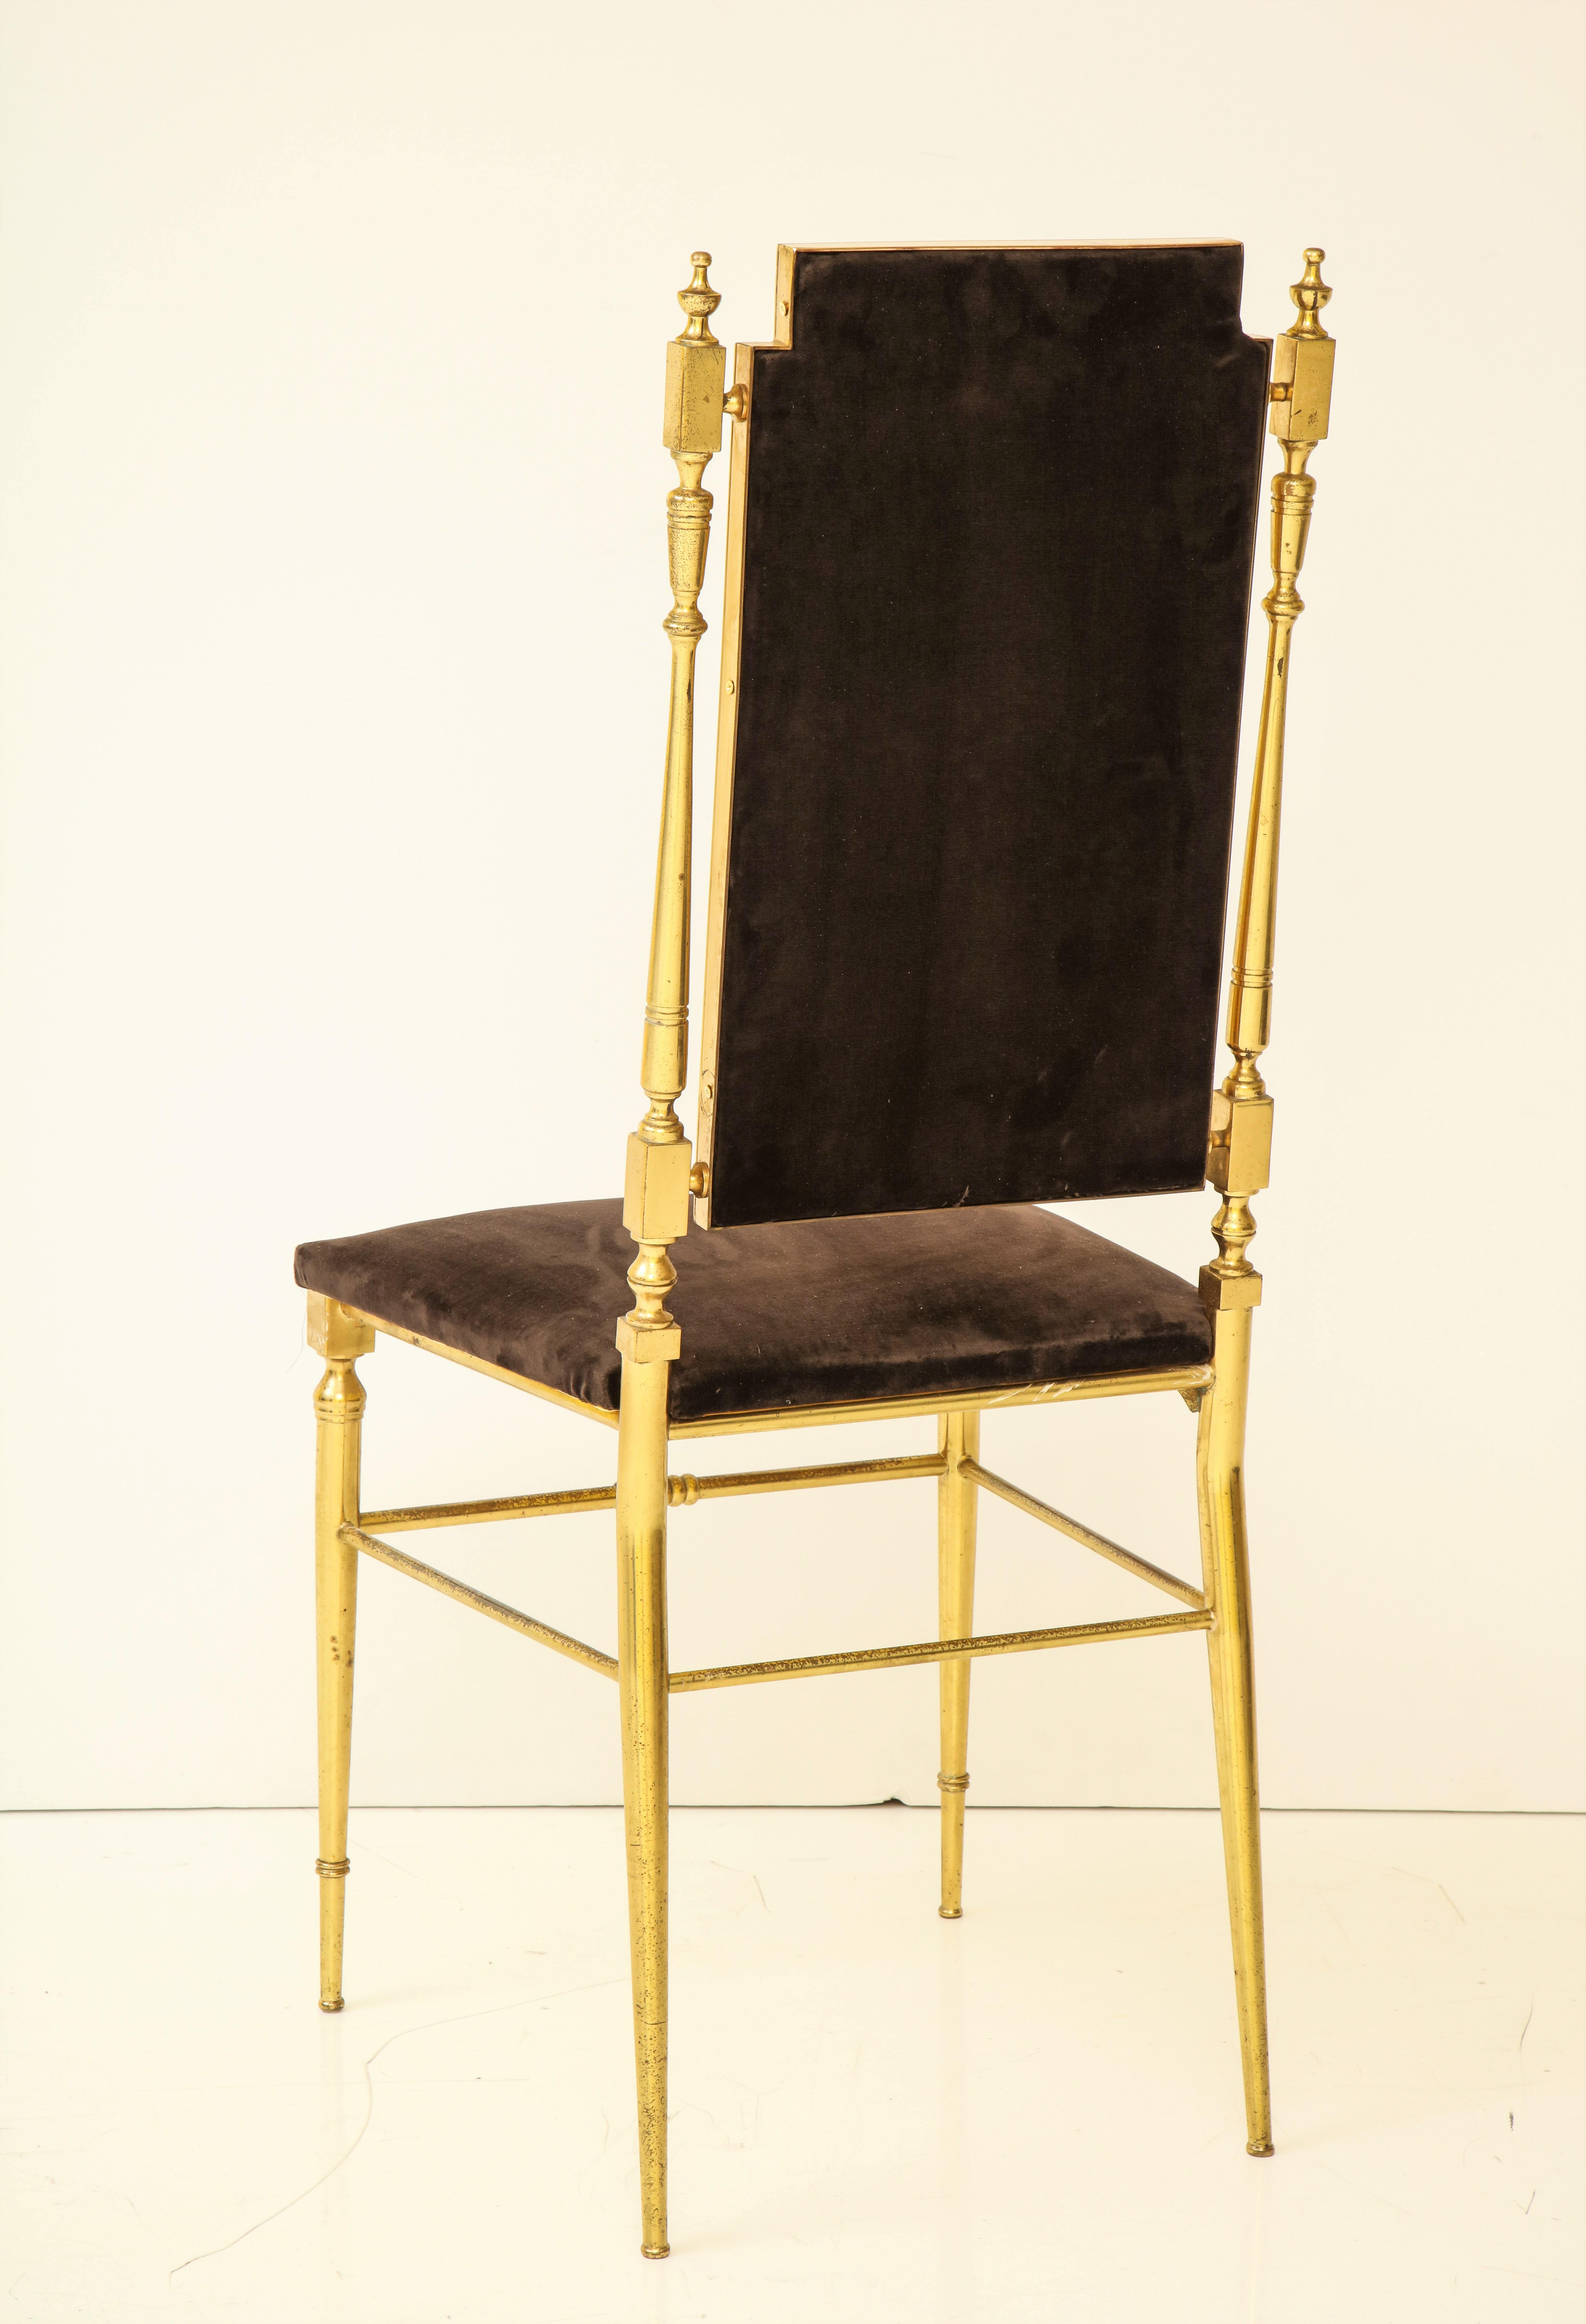 Suite of Four Solid Brass Chiavari Chairs, Italy, 1970s For Sale 5